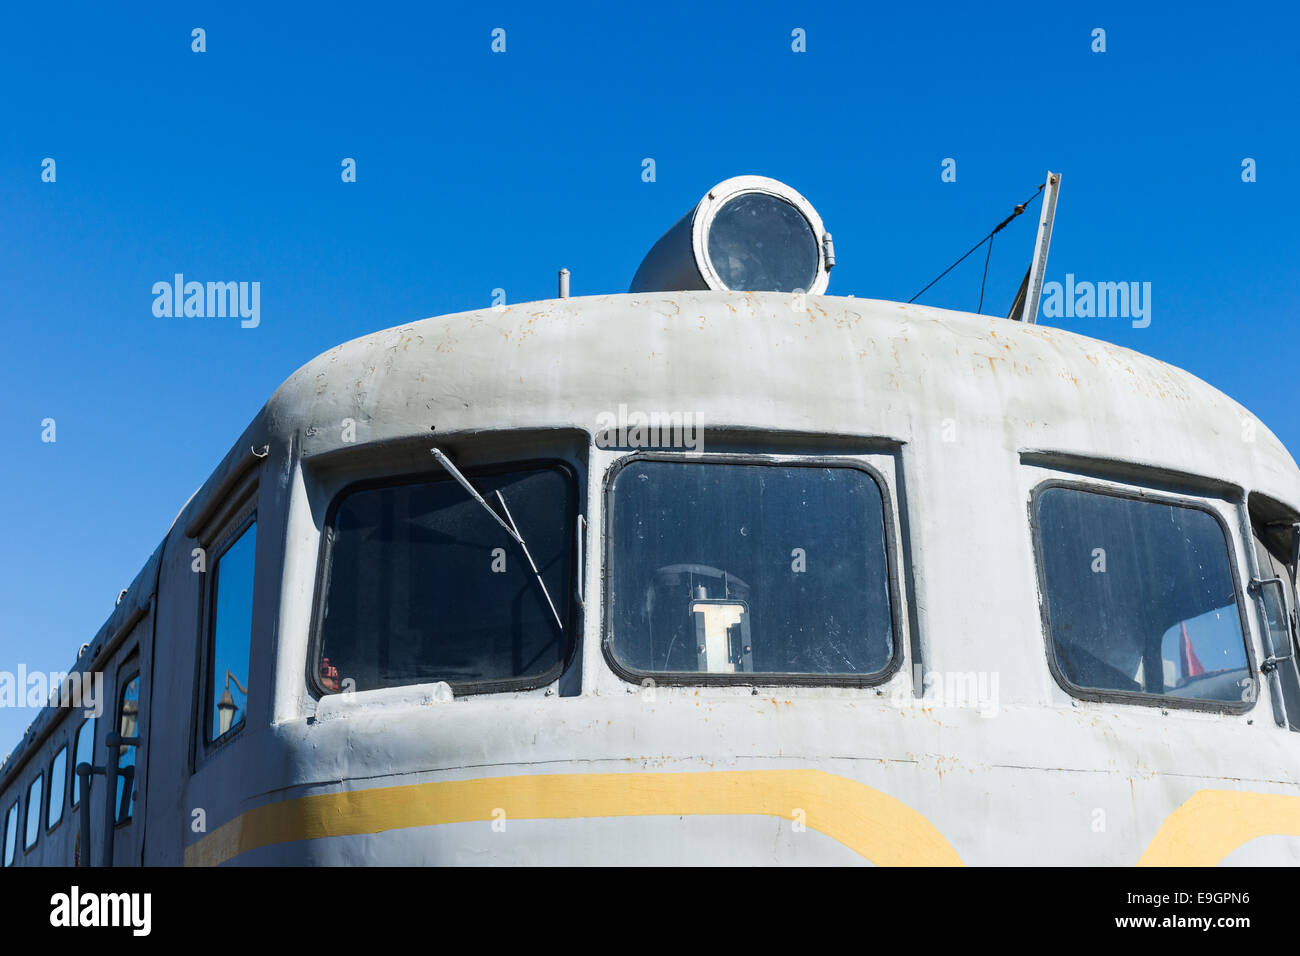 Closeup frontal view of an old diesel locomotive against the background of the clear blue sky Stock Photo